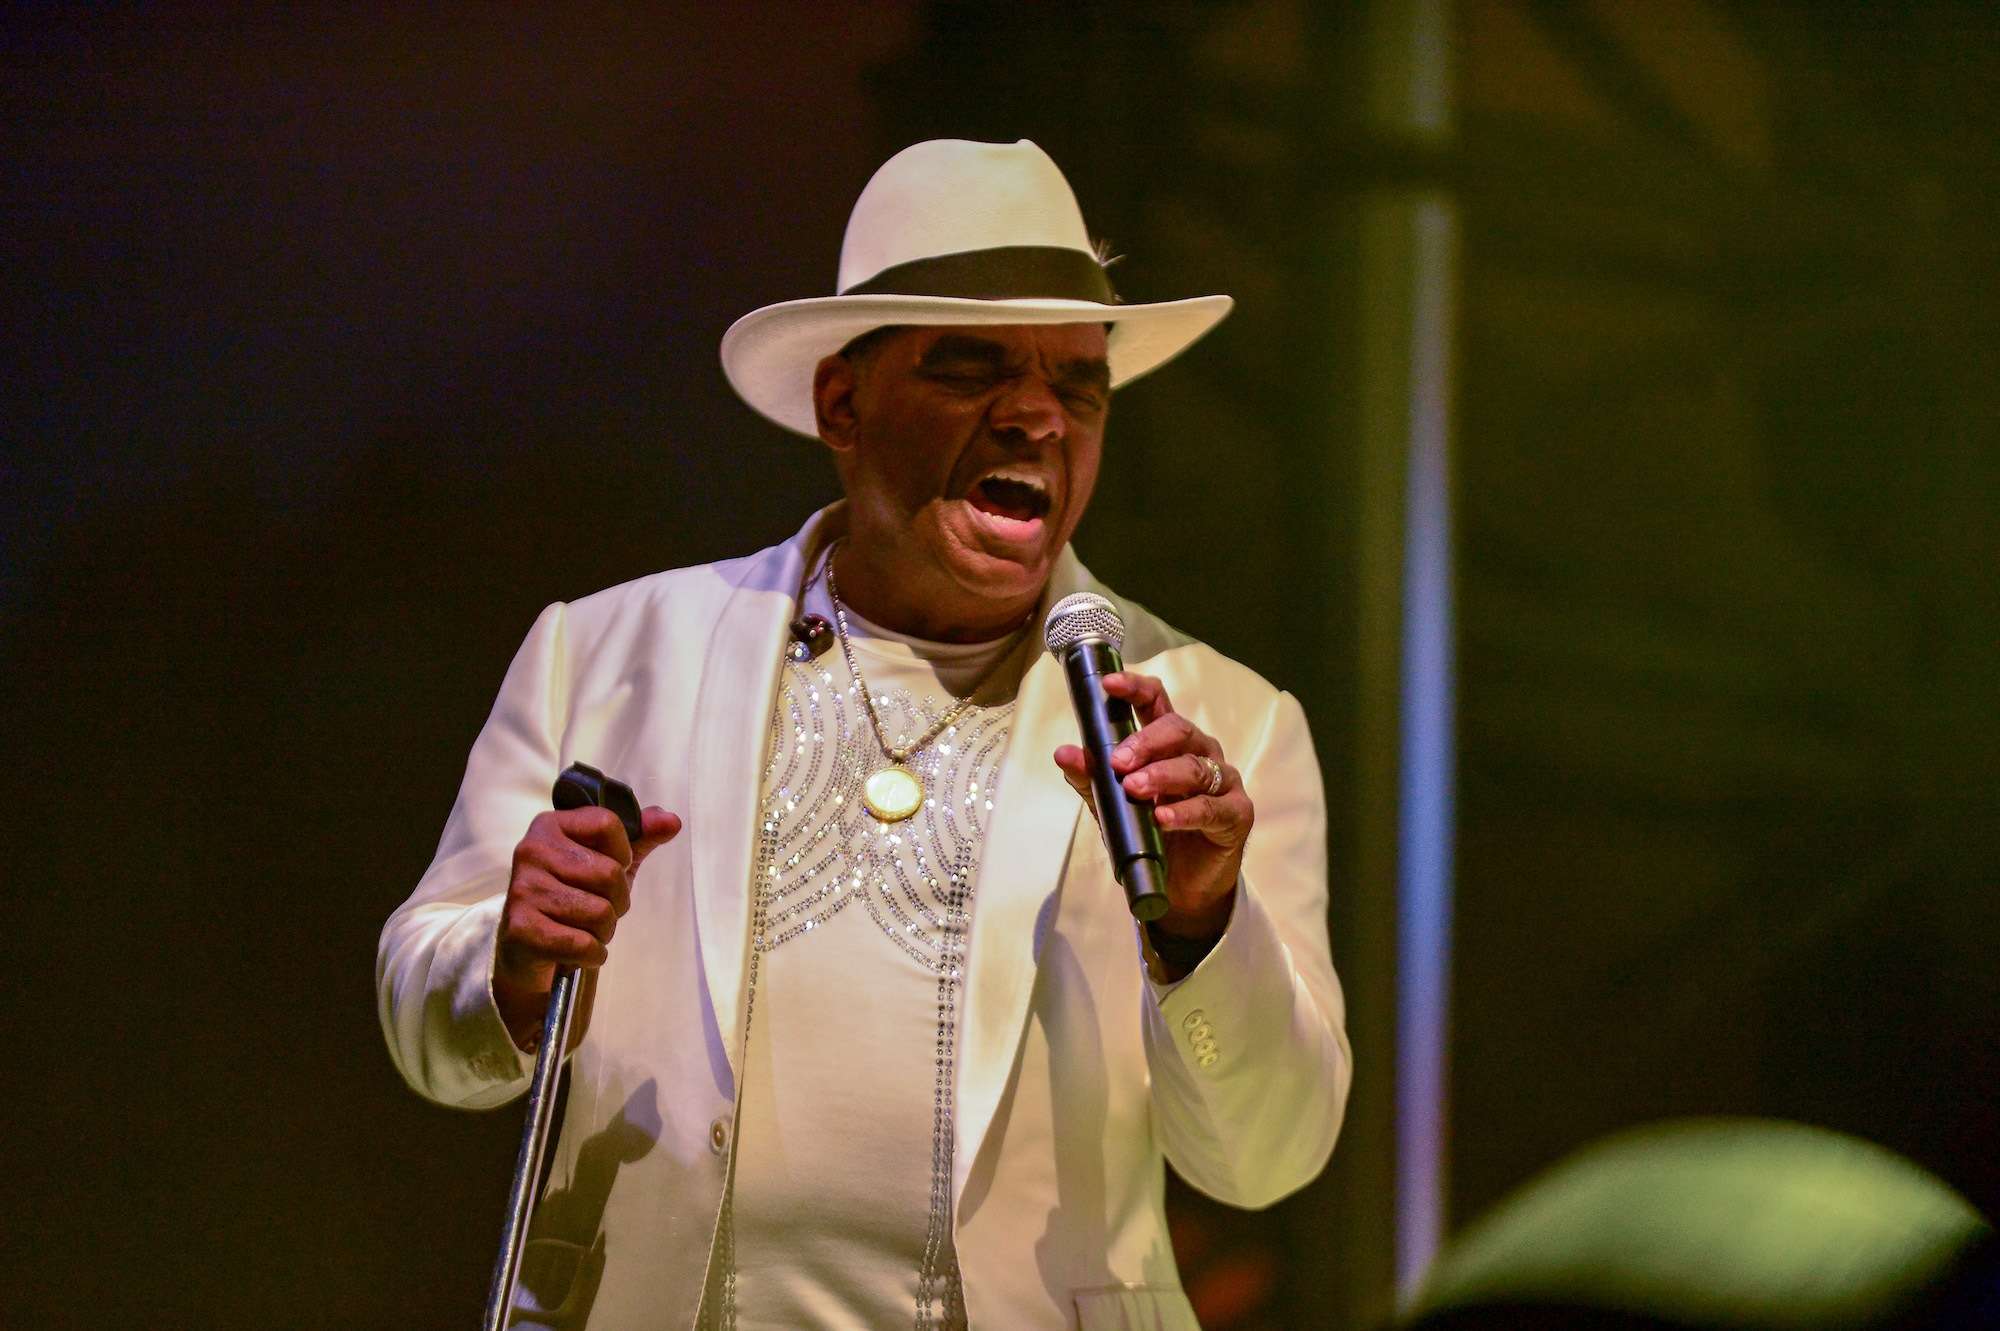 The Isley Brothers Live at Pitchfork [GALLERY] 11